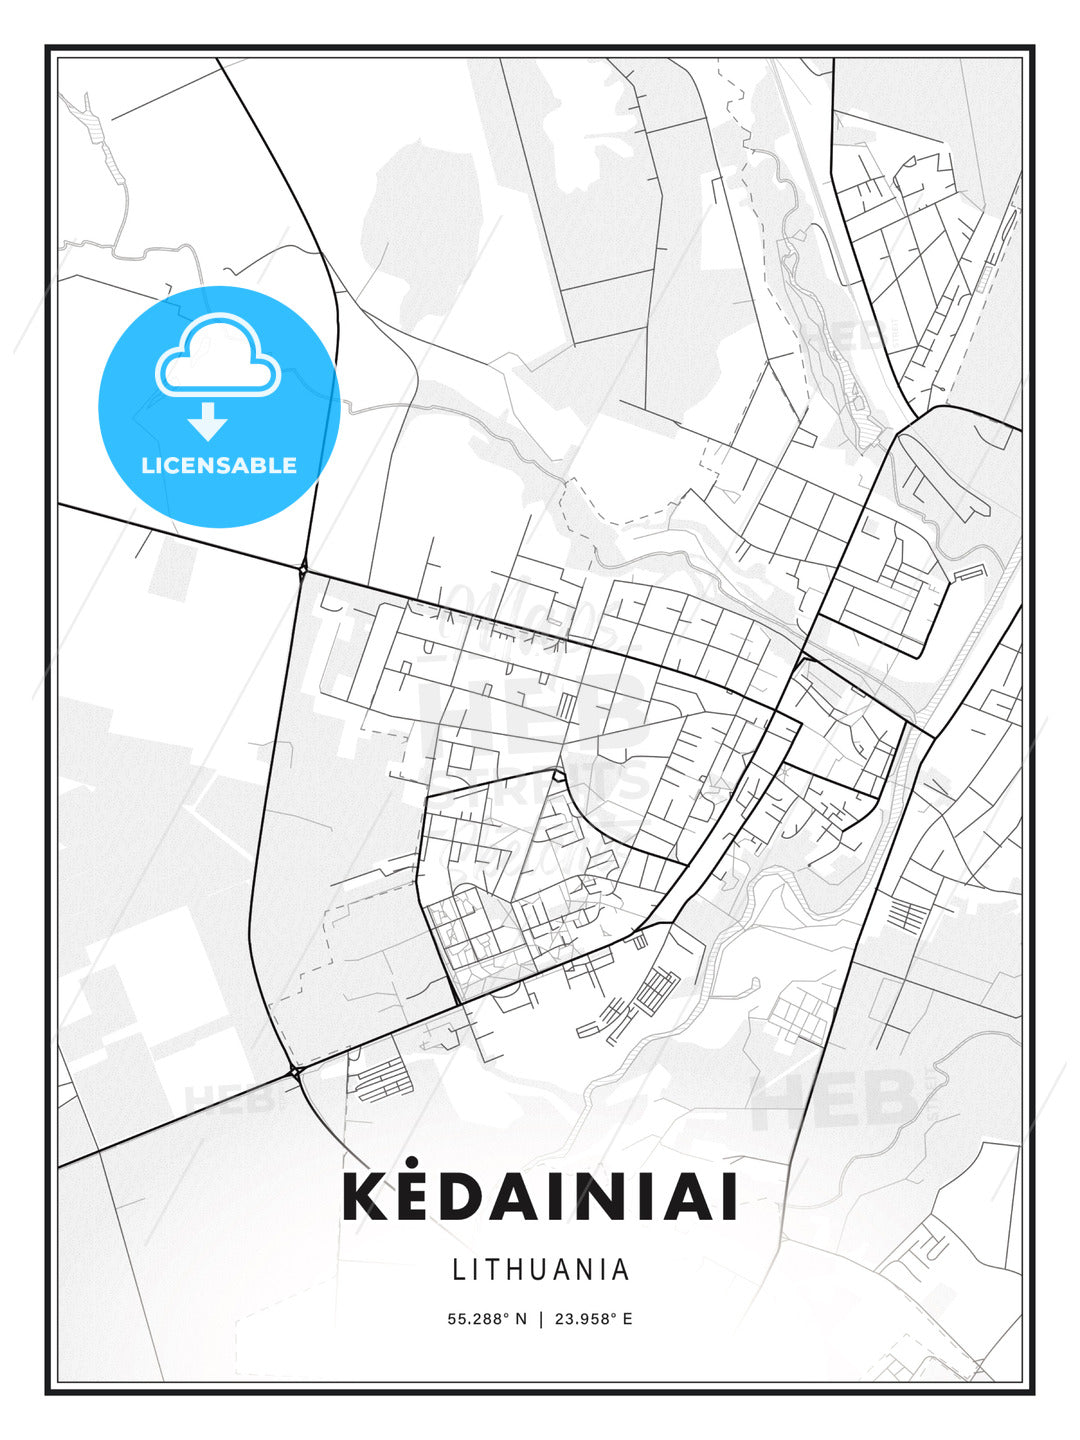 Kėdainiai, Lithuania, Modern Print Template in Various Formats - HEBSTREITS Sketches